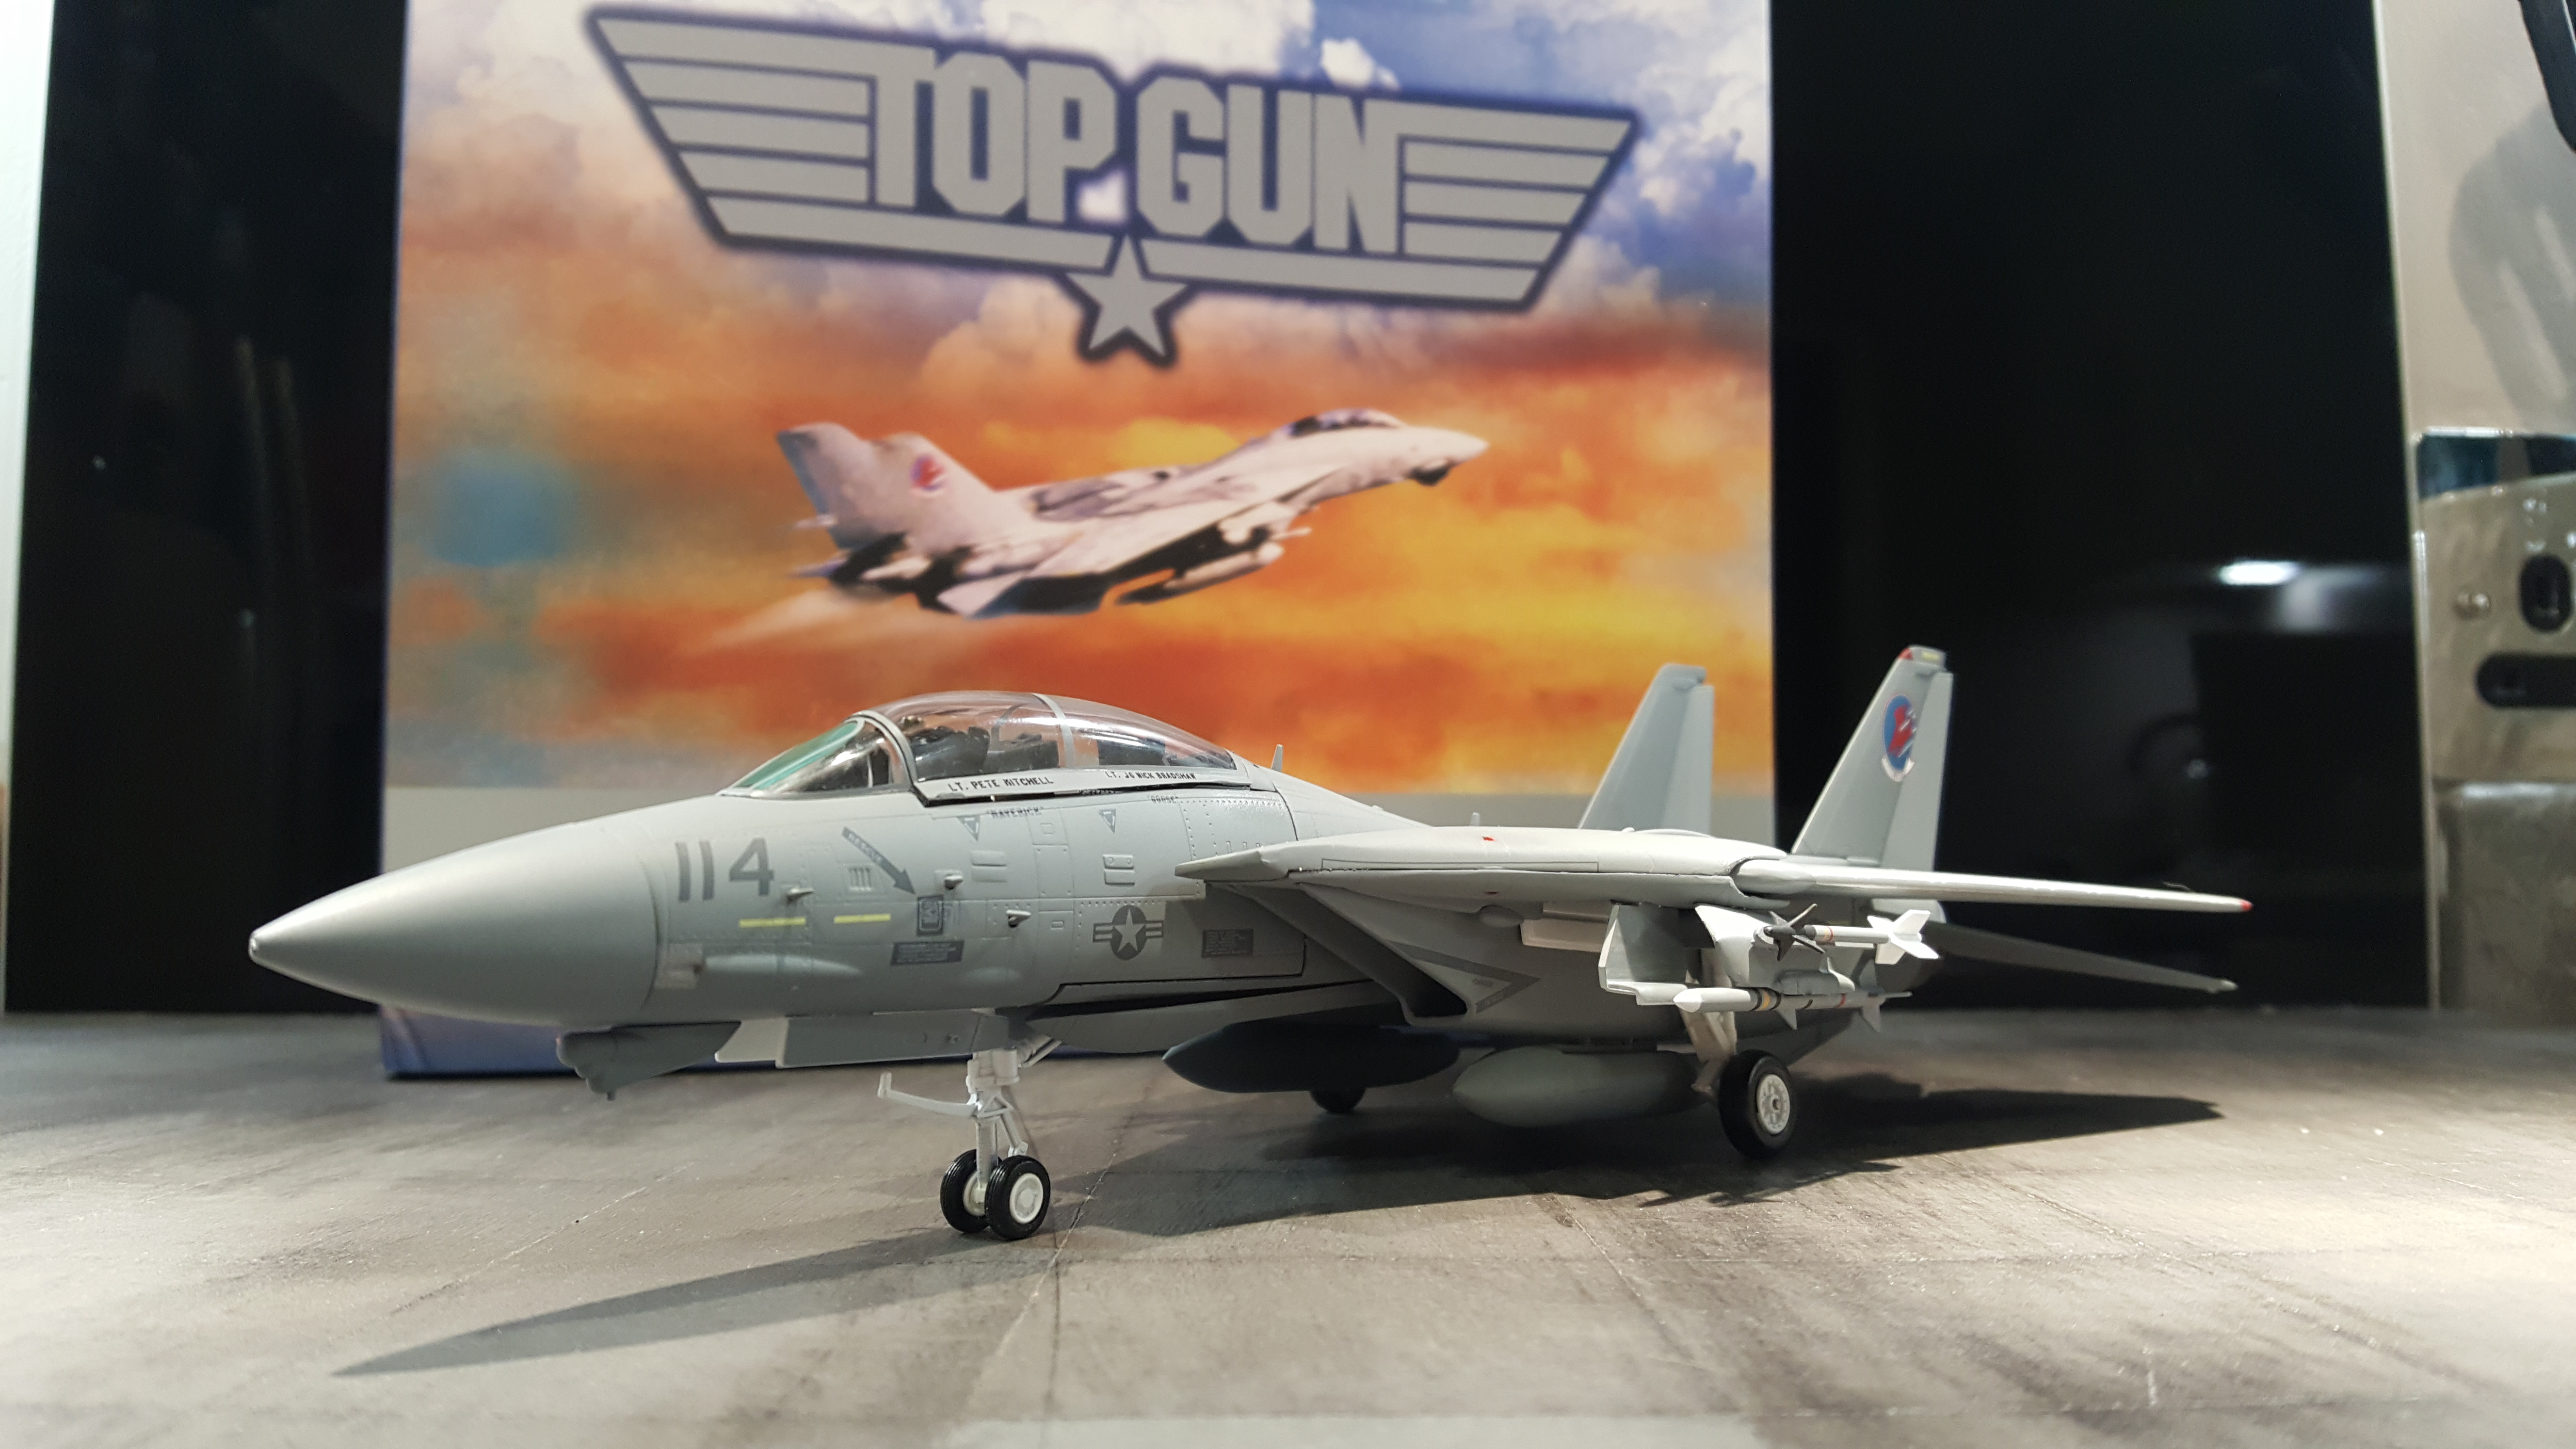  Top  Gun  F 14 Scale 1 72 model  review by Airspotters com 